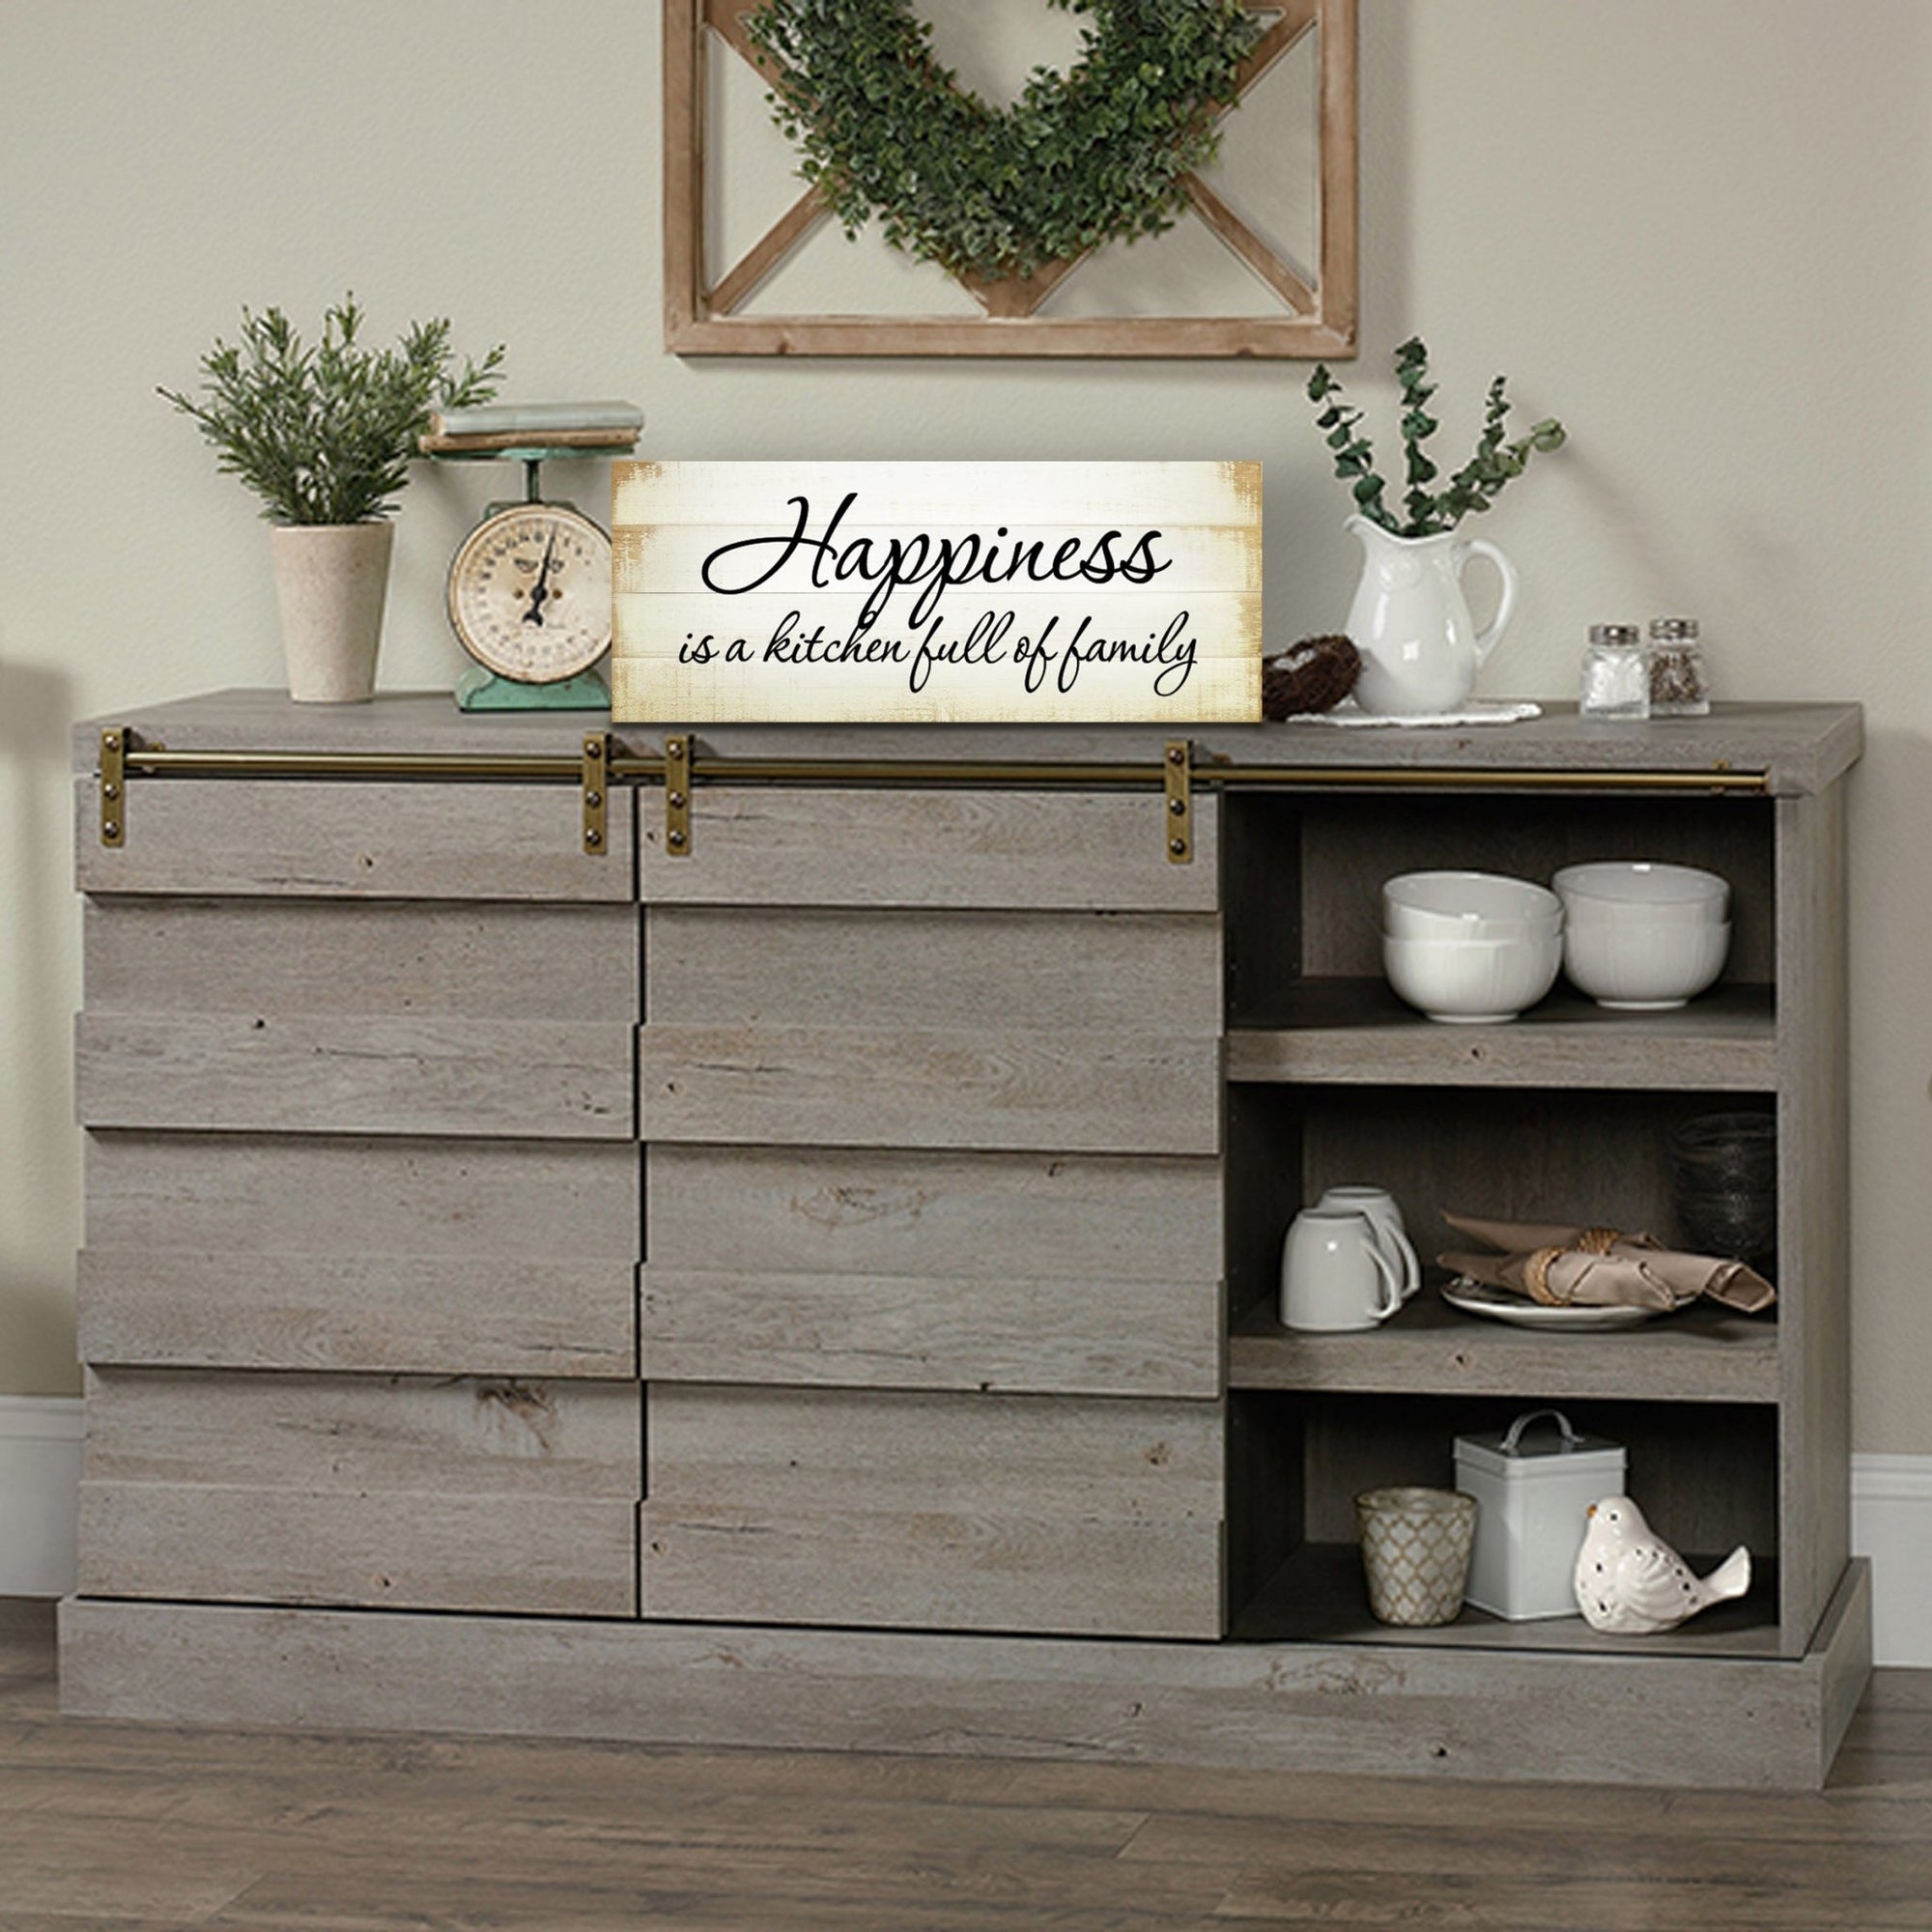 Happiness Is A Kitchen Inspirational Wooden Wall Hanging Plaque Kitchen Home Décor For All Season Decoration - LifeSong Milestones